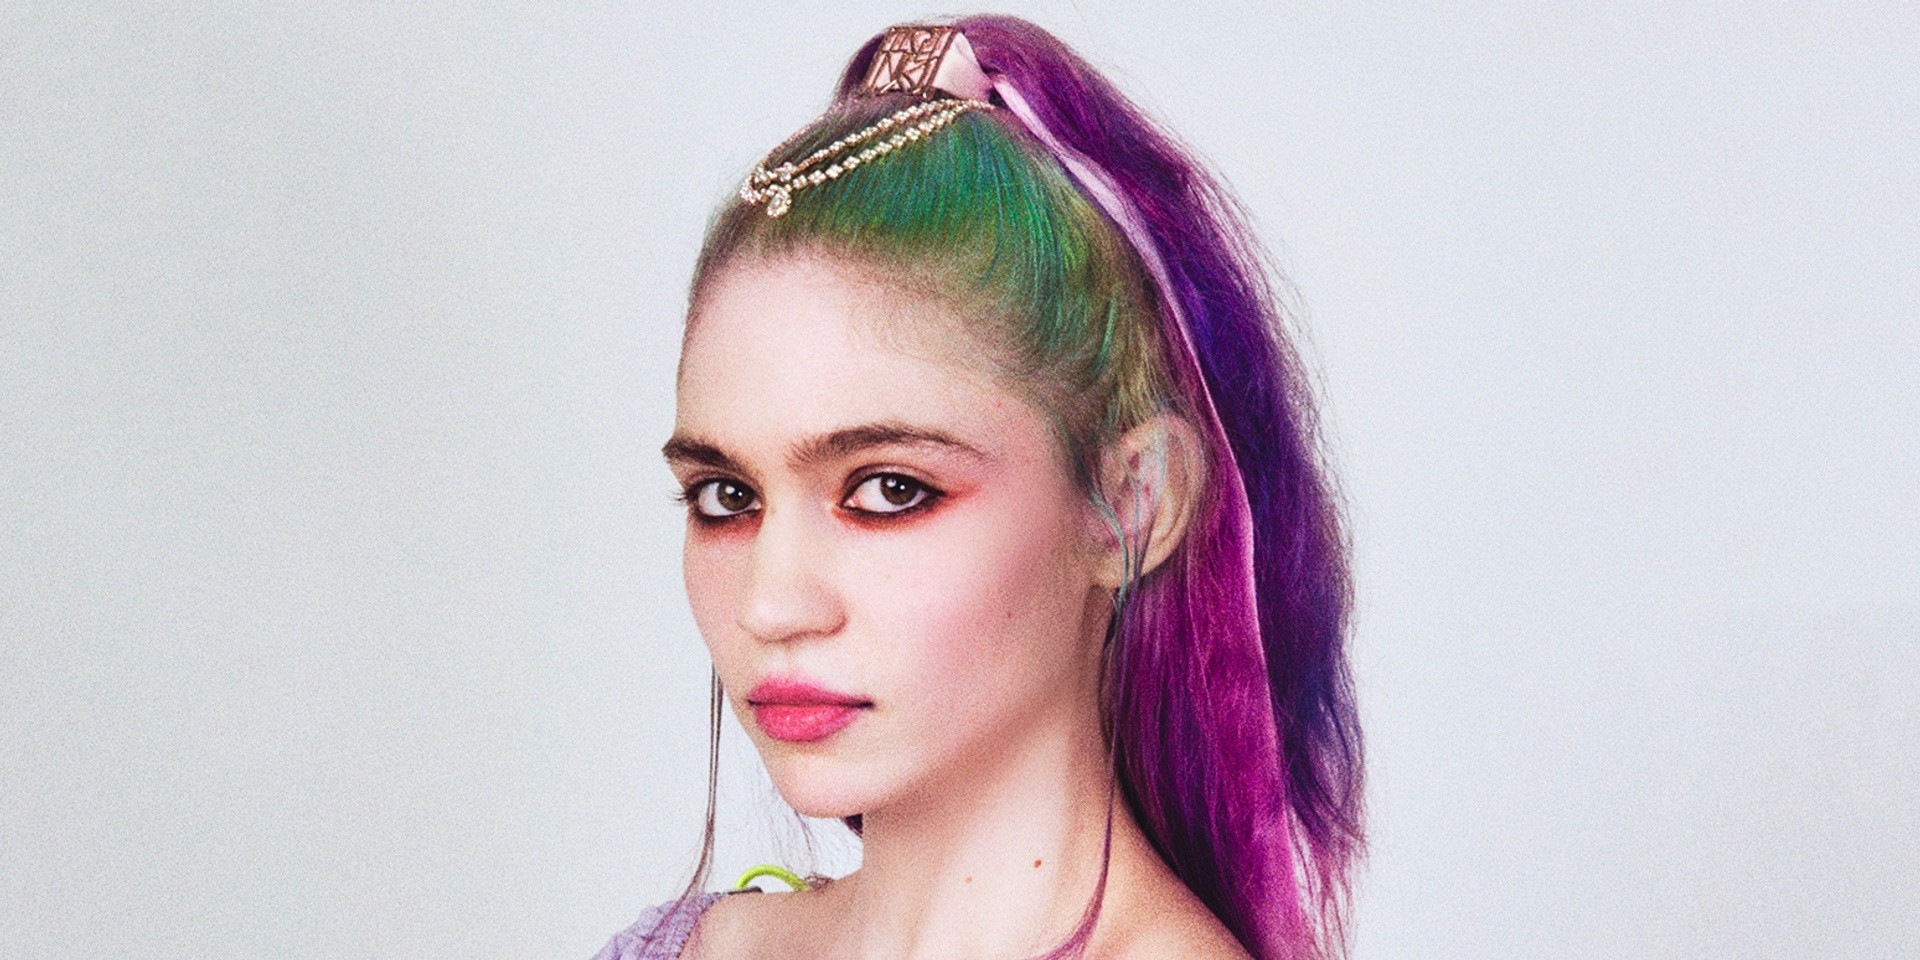 Grimes reveals that her new single 'So Heavy' will be out this week